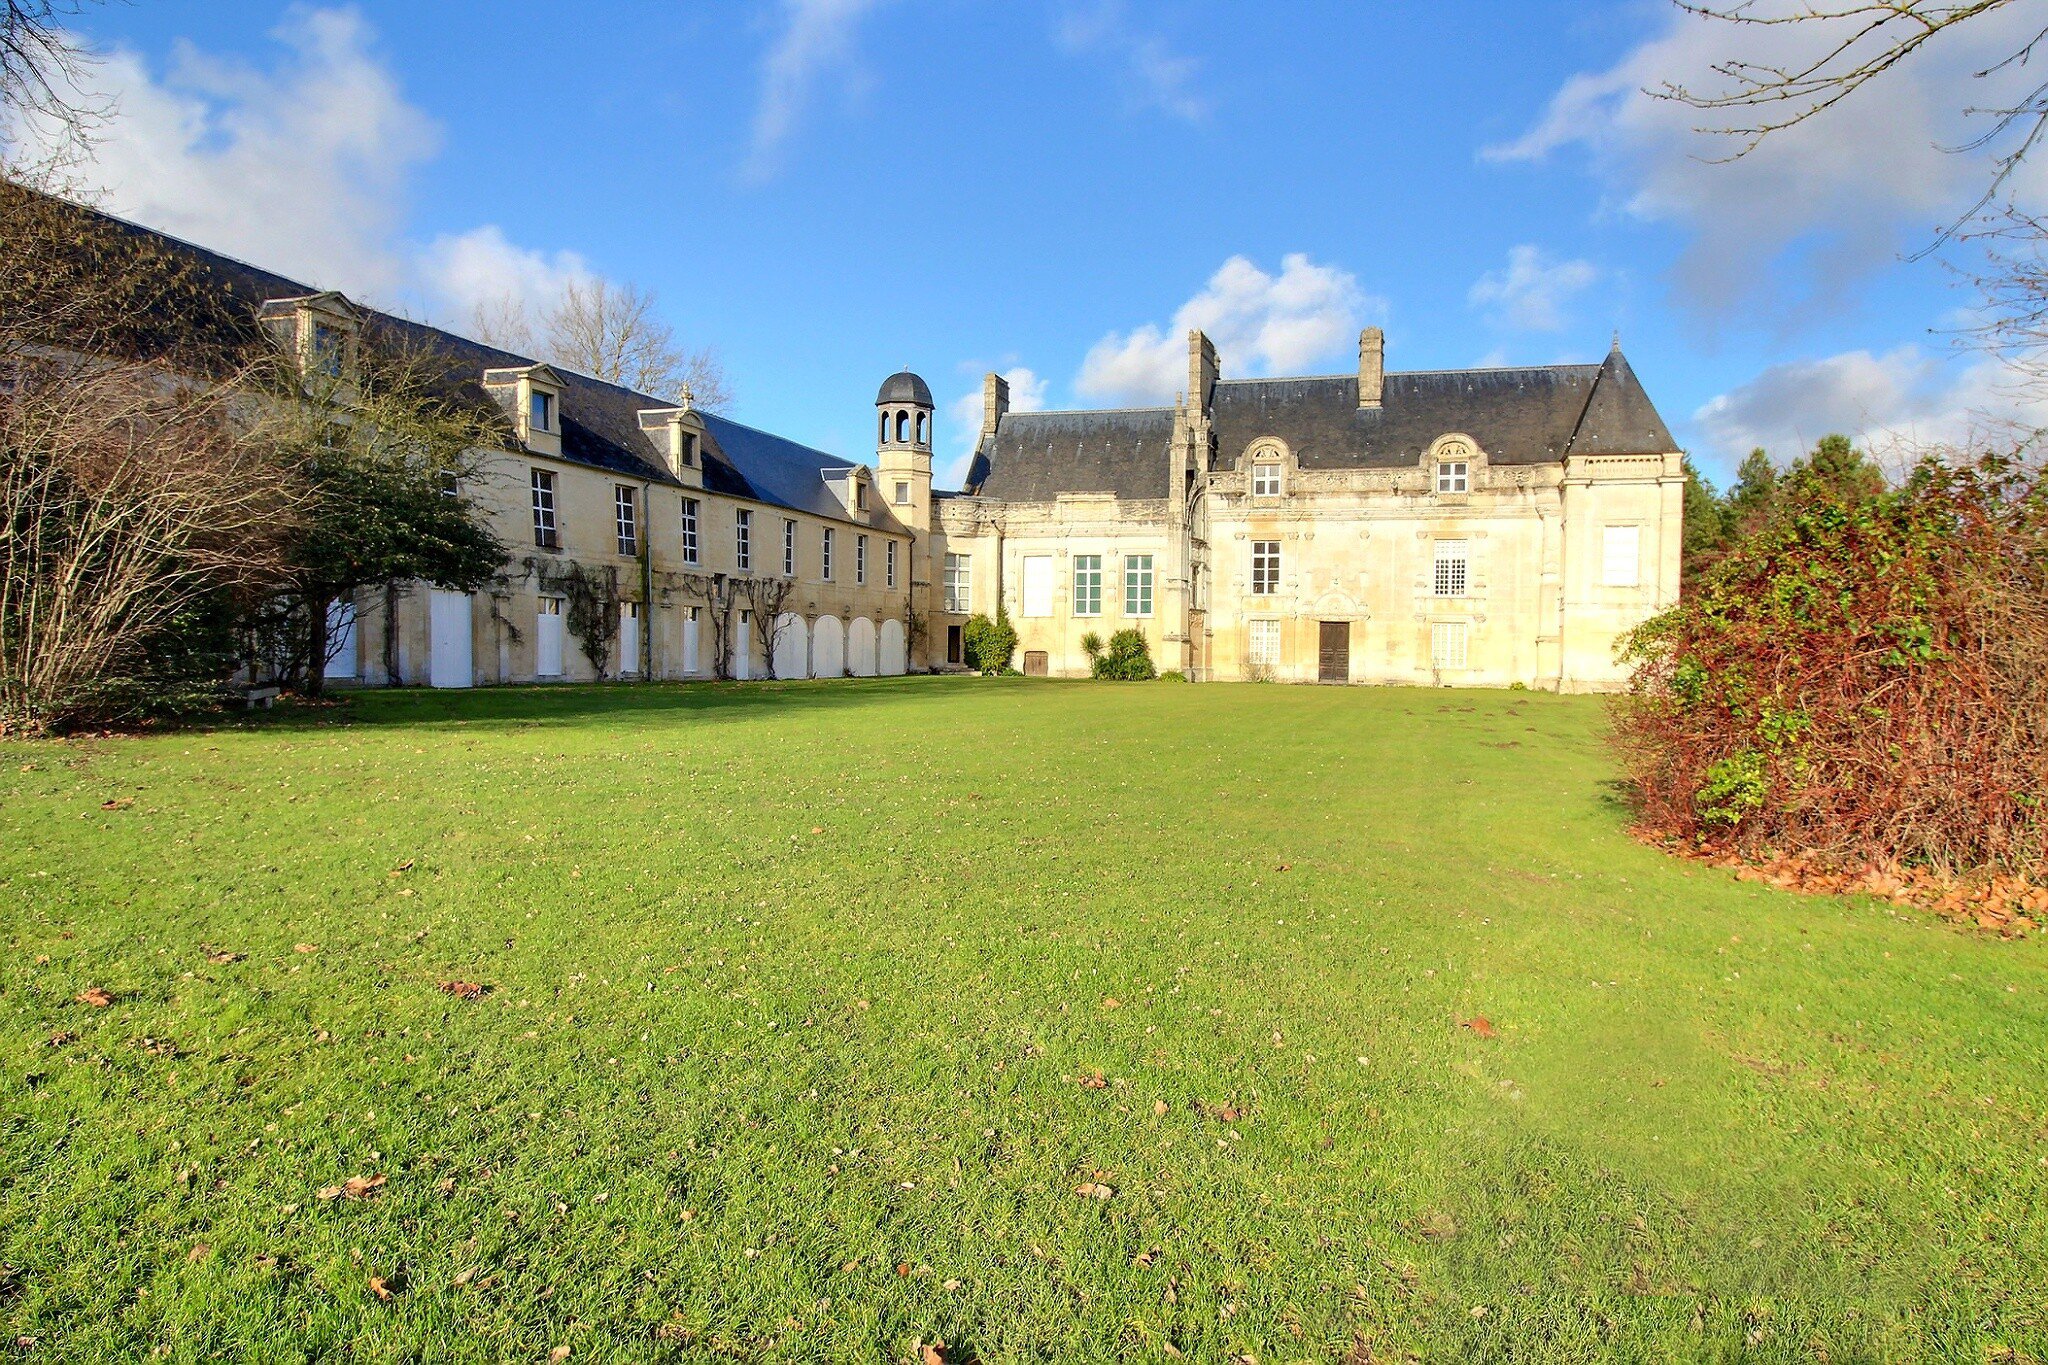 Francis York Renaissance Chateau in Normandy, France Listed for €1.5M  18.jpg